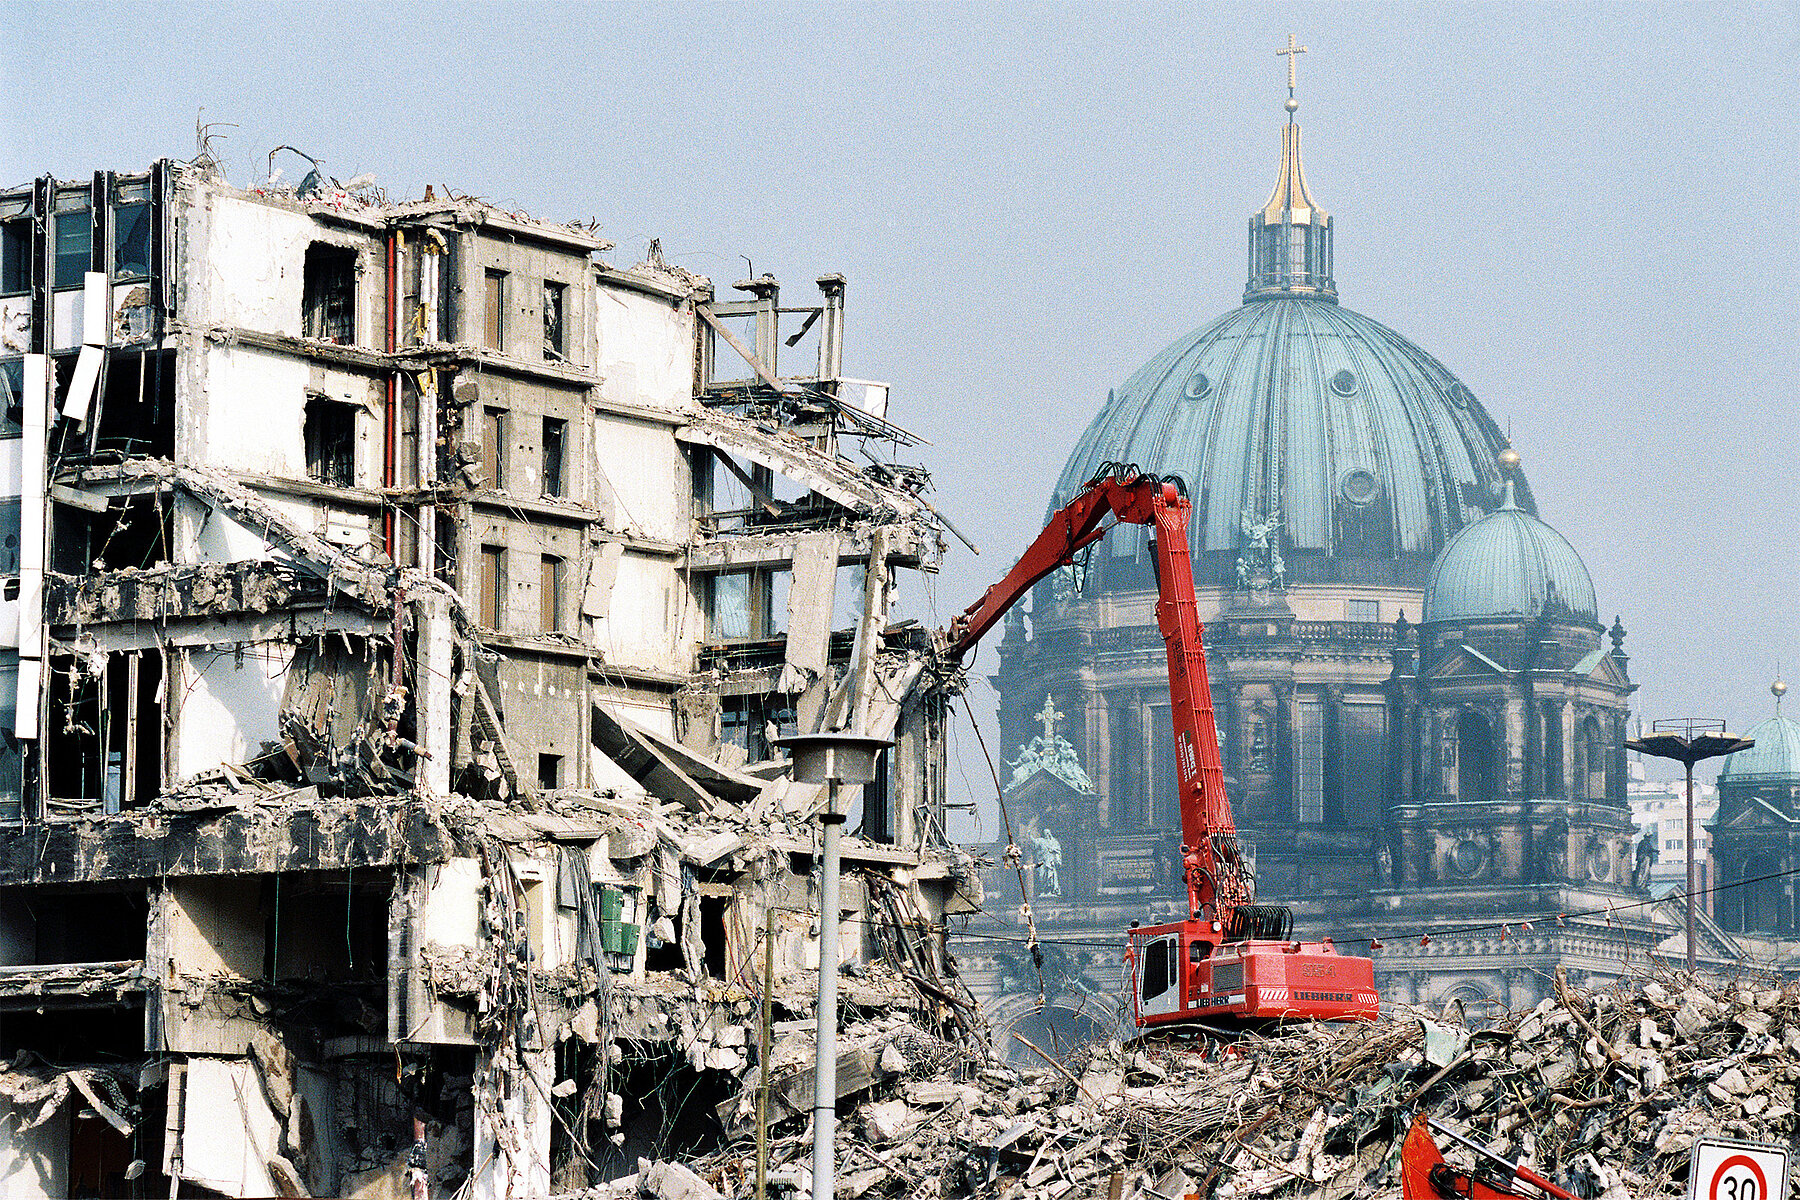 On the left, the high-rise building of the Ministry of Foreign Affairs of the GDR is being demolished by a red excavator. Behind it on the right is the Berlin Cathedral.  